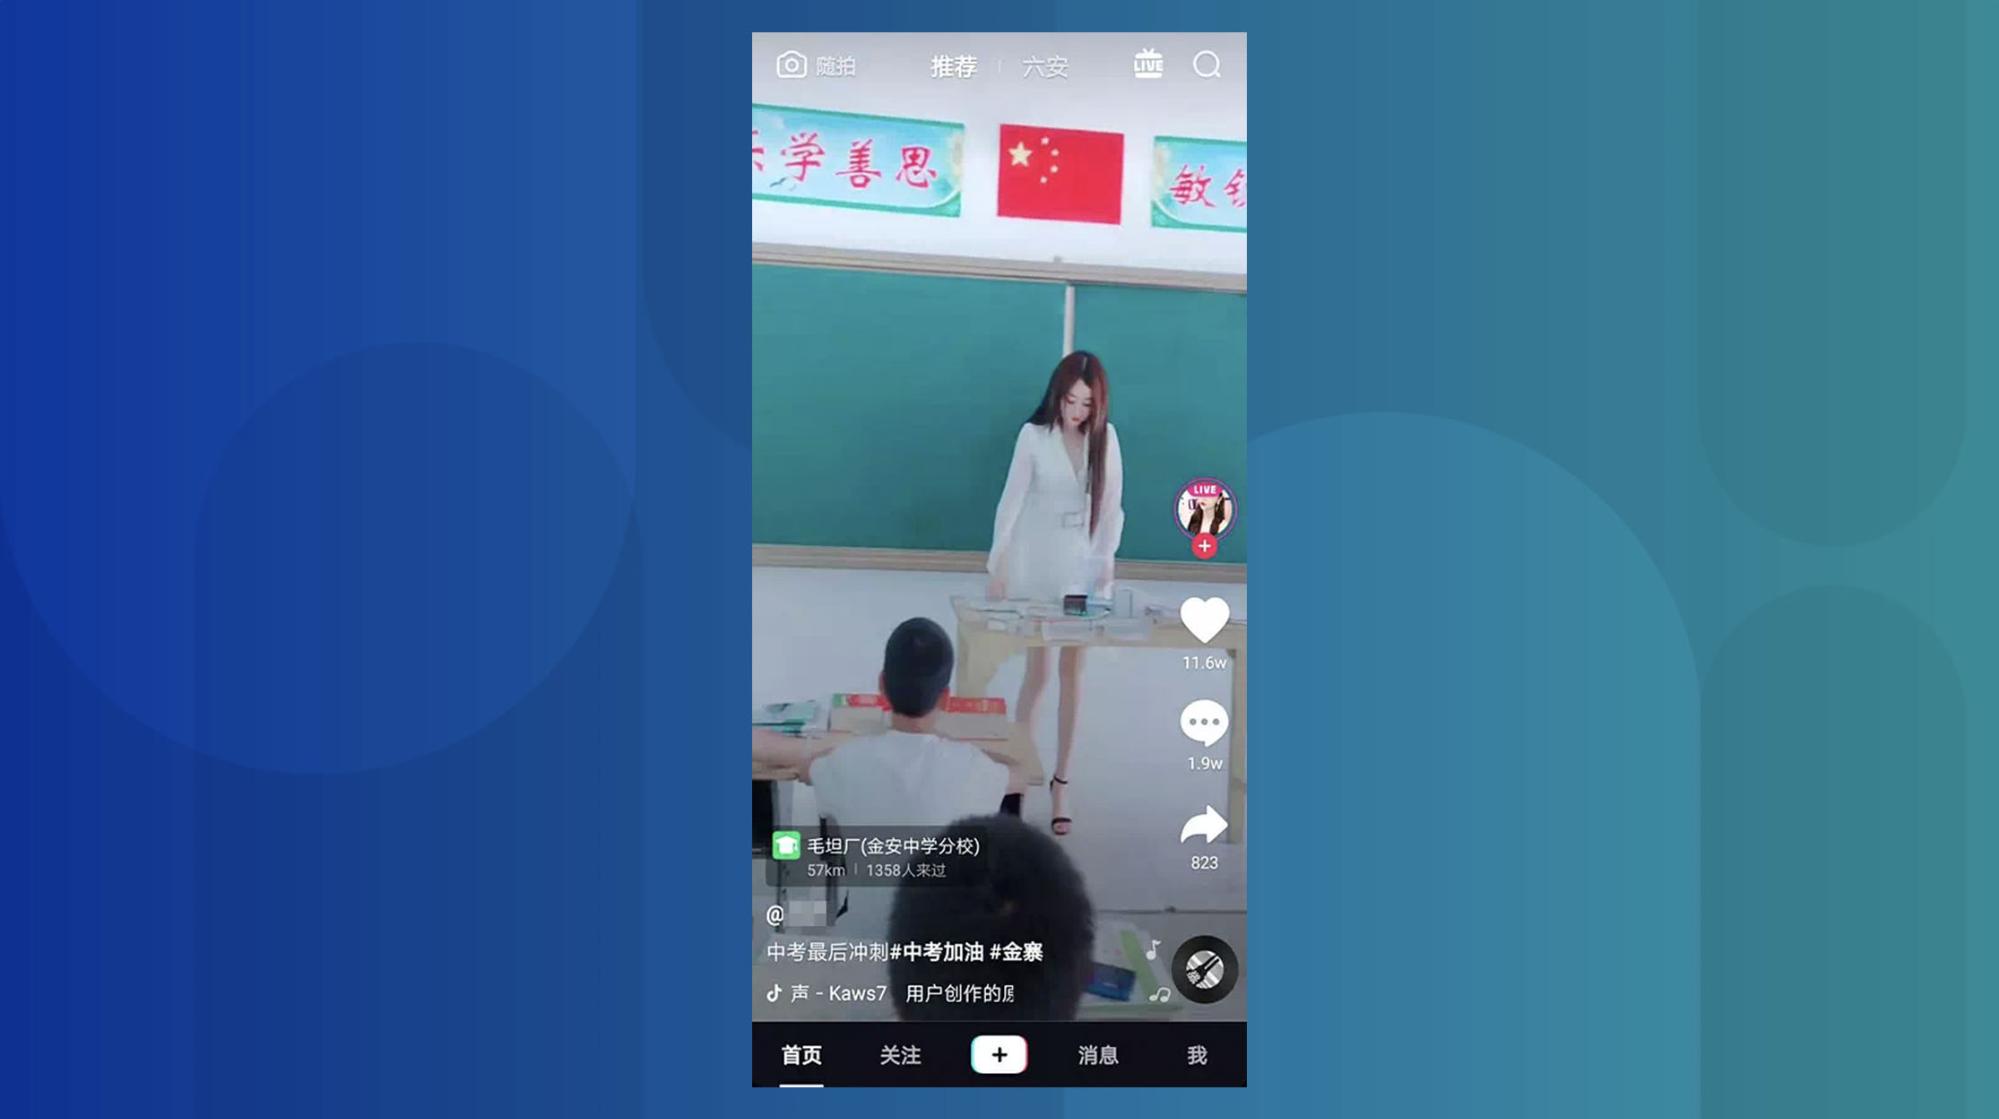 One of the user’s classroom videos drew more than 116,000 likes and 19,000 comments on Douyin. (Picture: 六安人论坛 on WeChat)